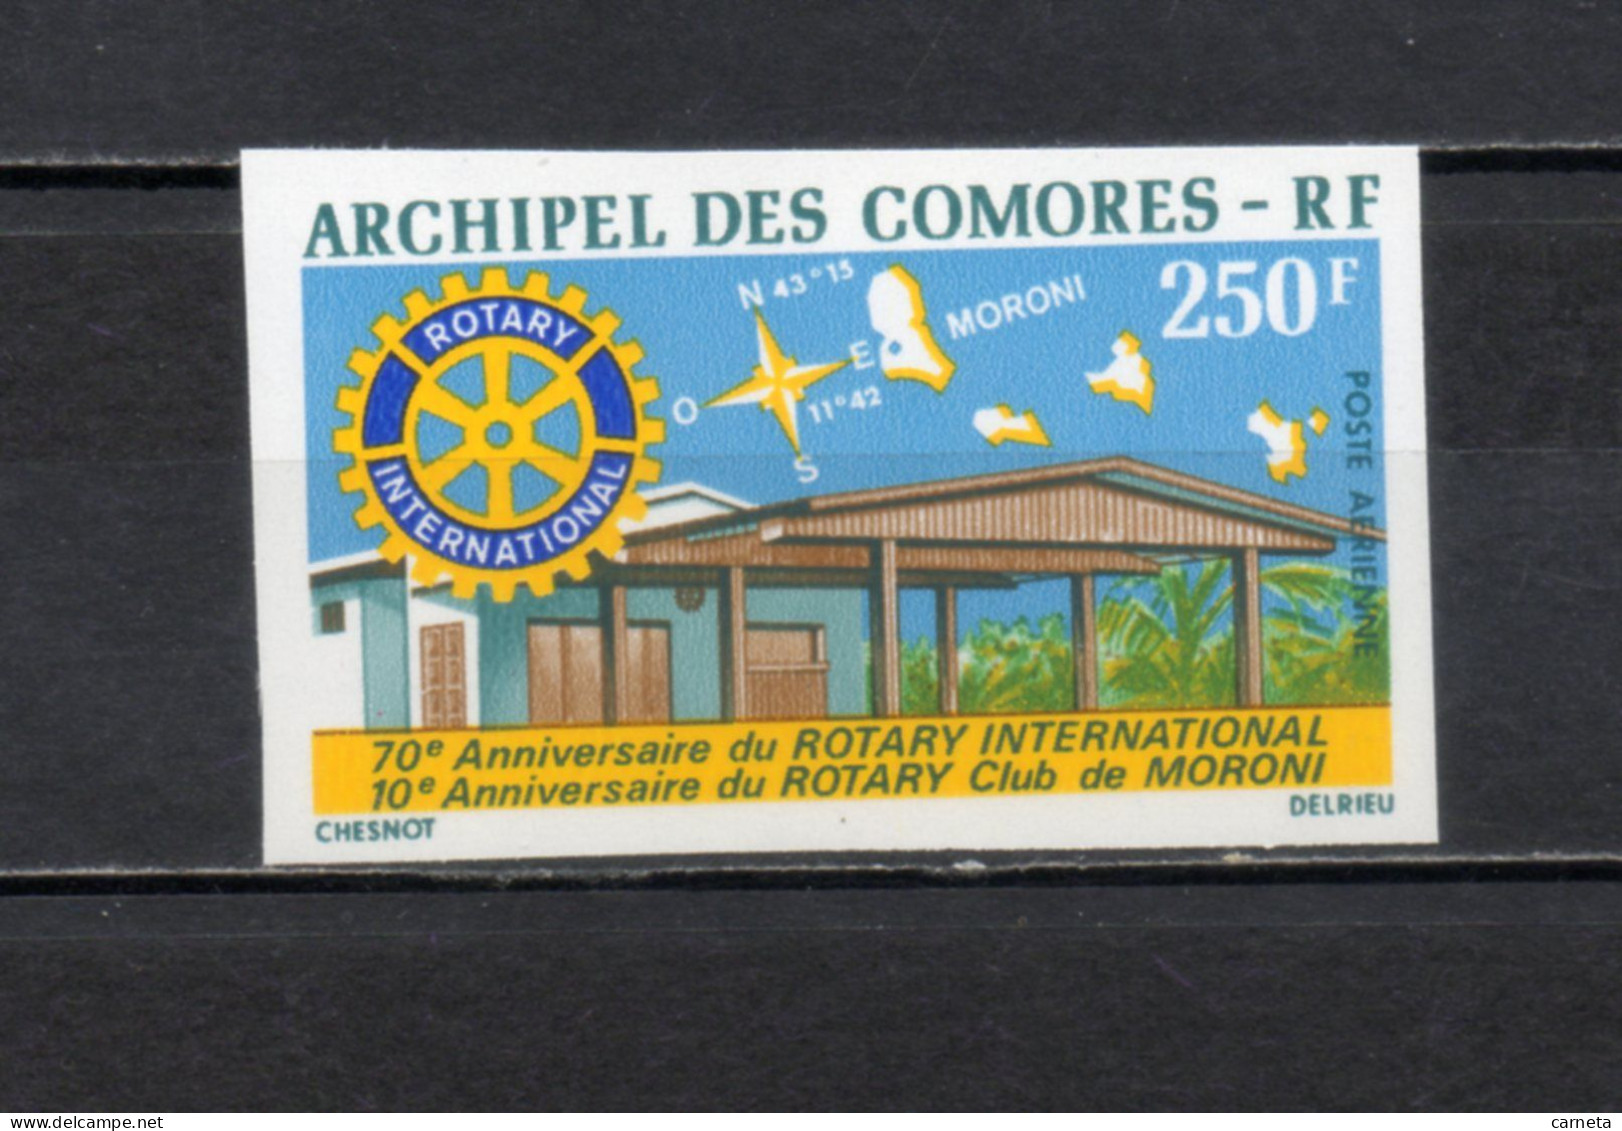 COMORES PA N° 66  NON DENTELE   NEUF SANS CHARNIERE COTE 40.00€  ROTARY INTERNATIONAL - Luchtpost